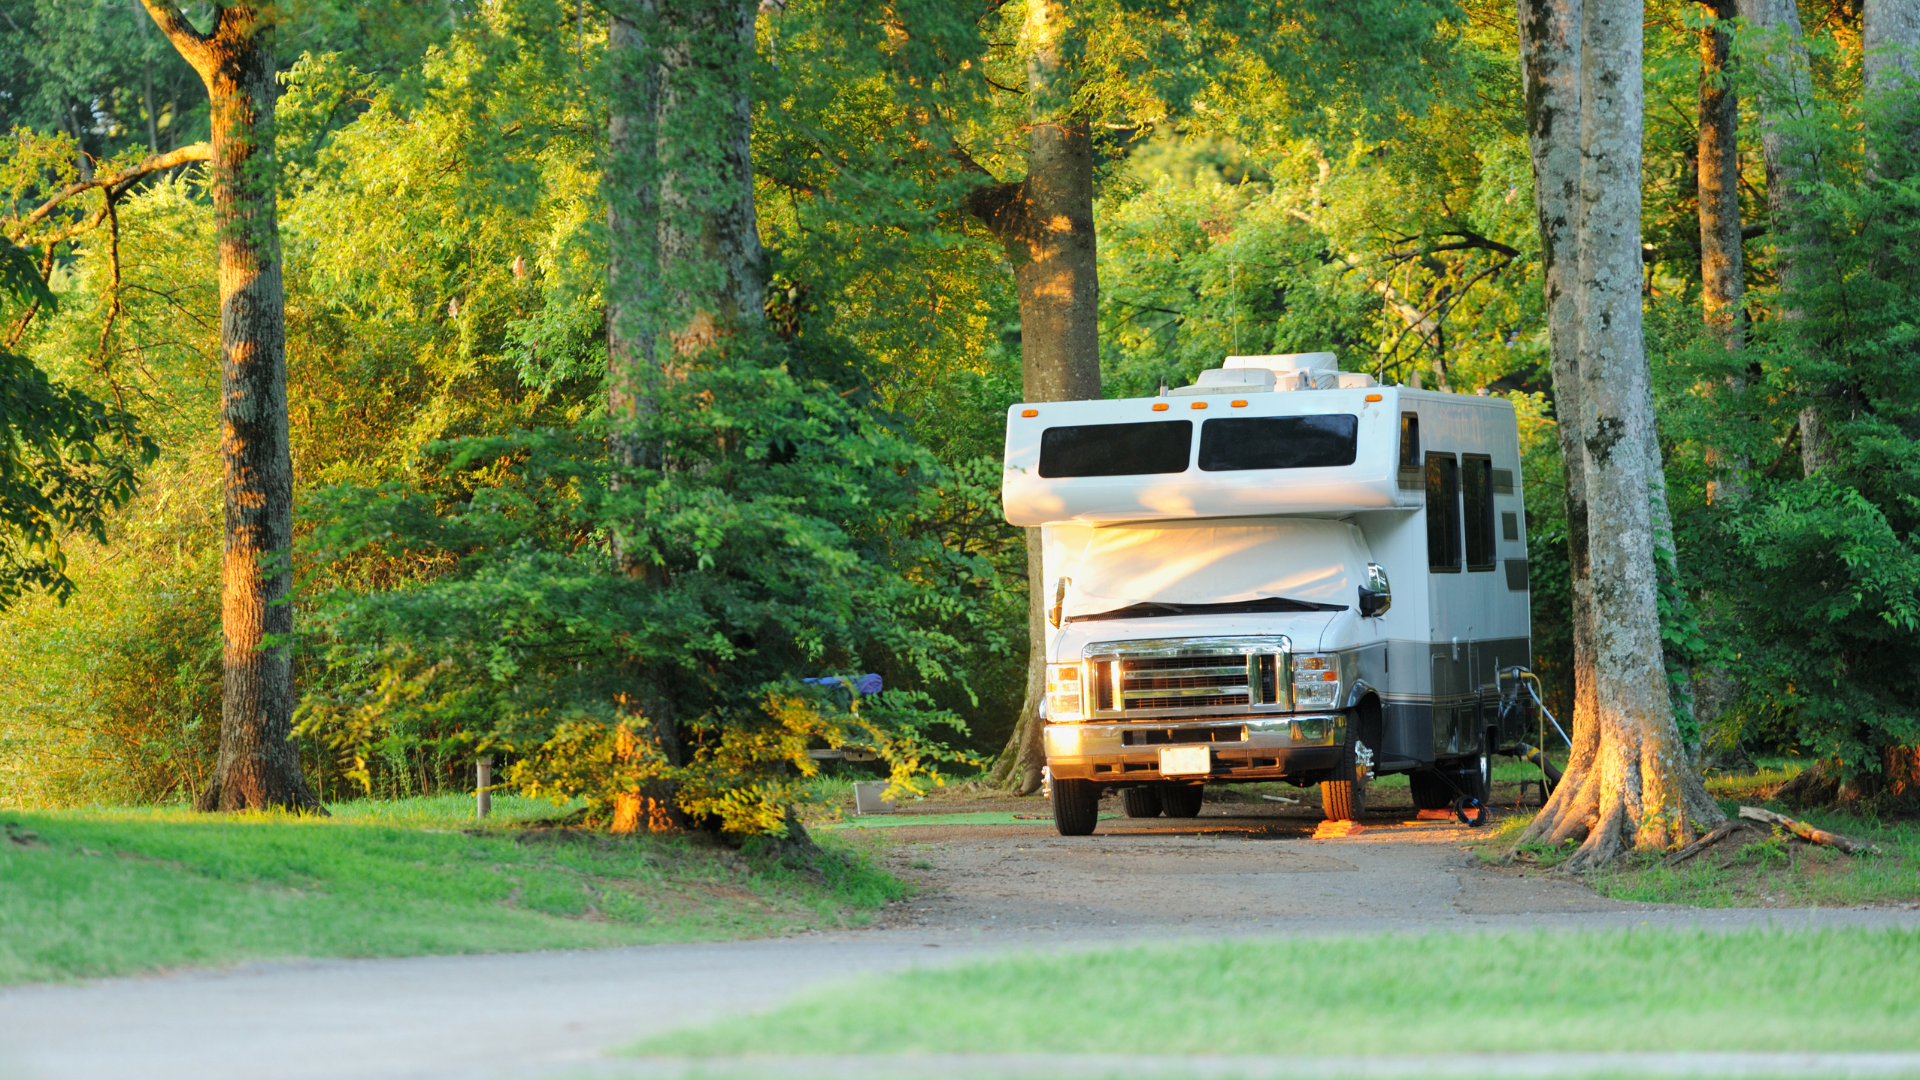 10 Best Campgrounds in the Midwest